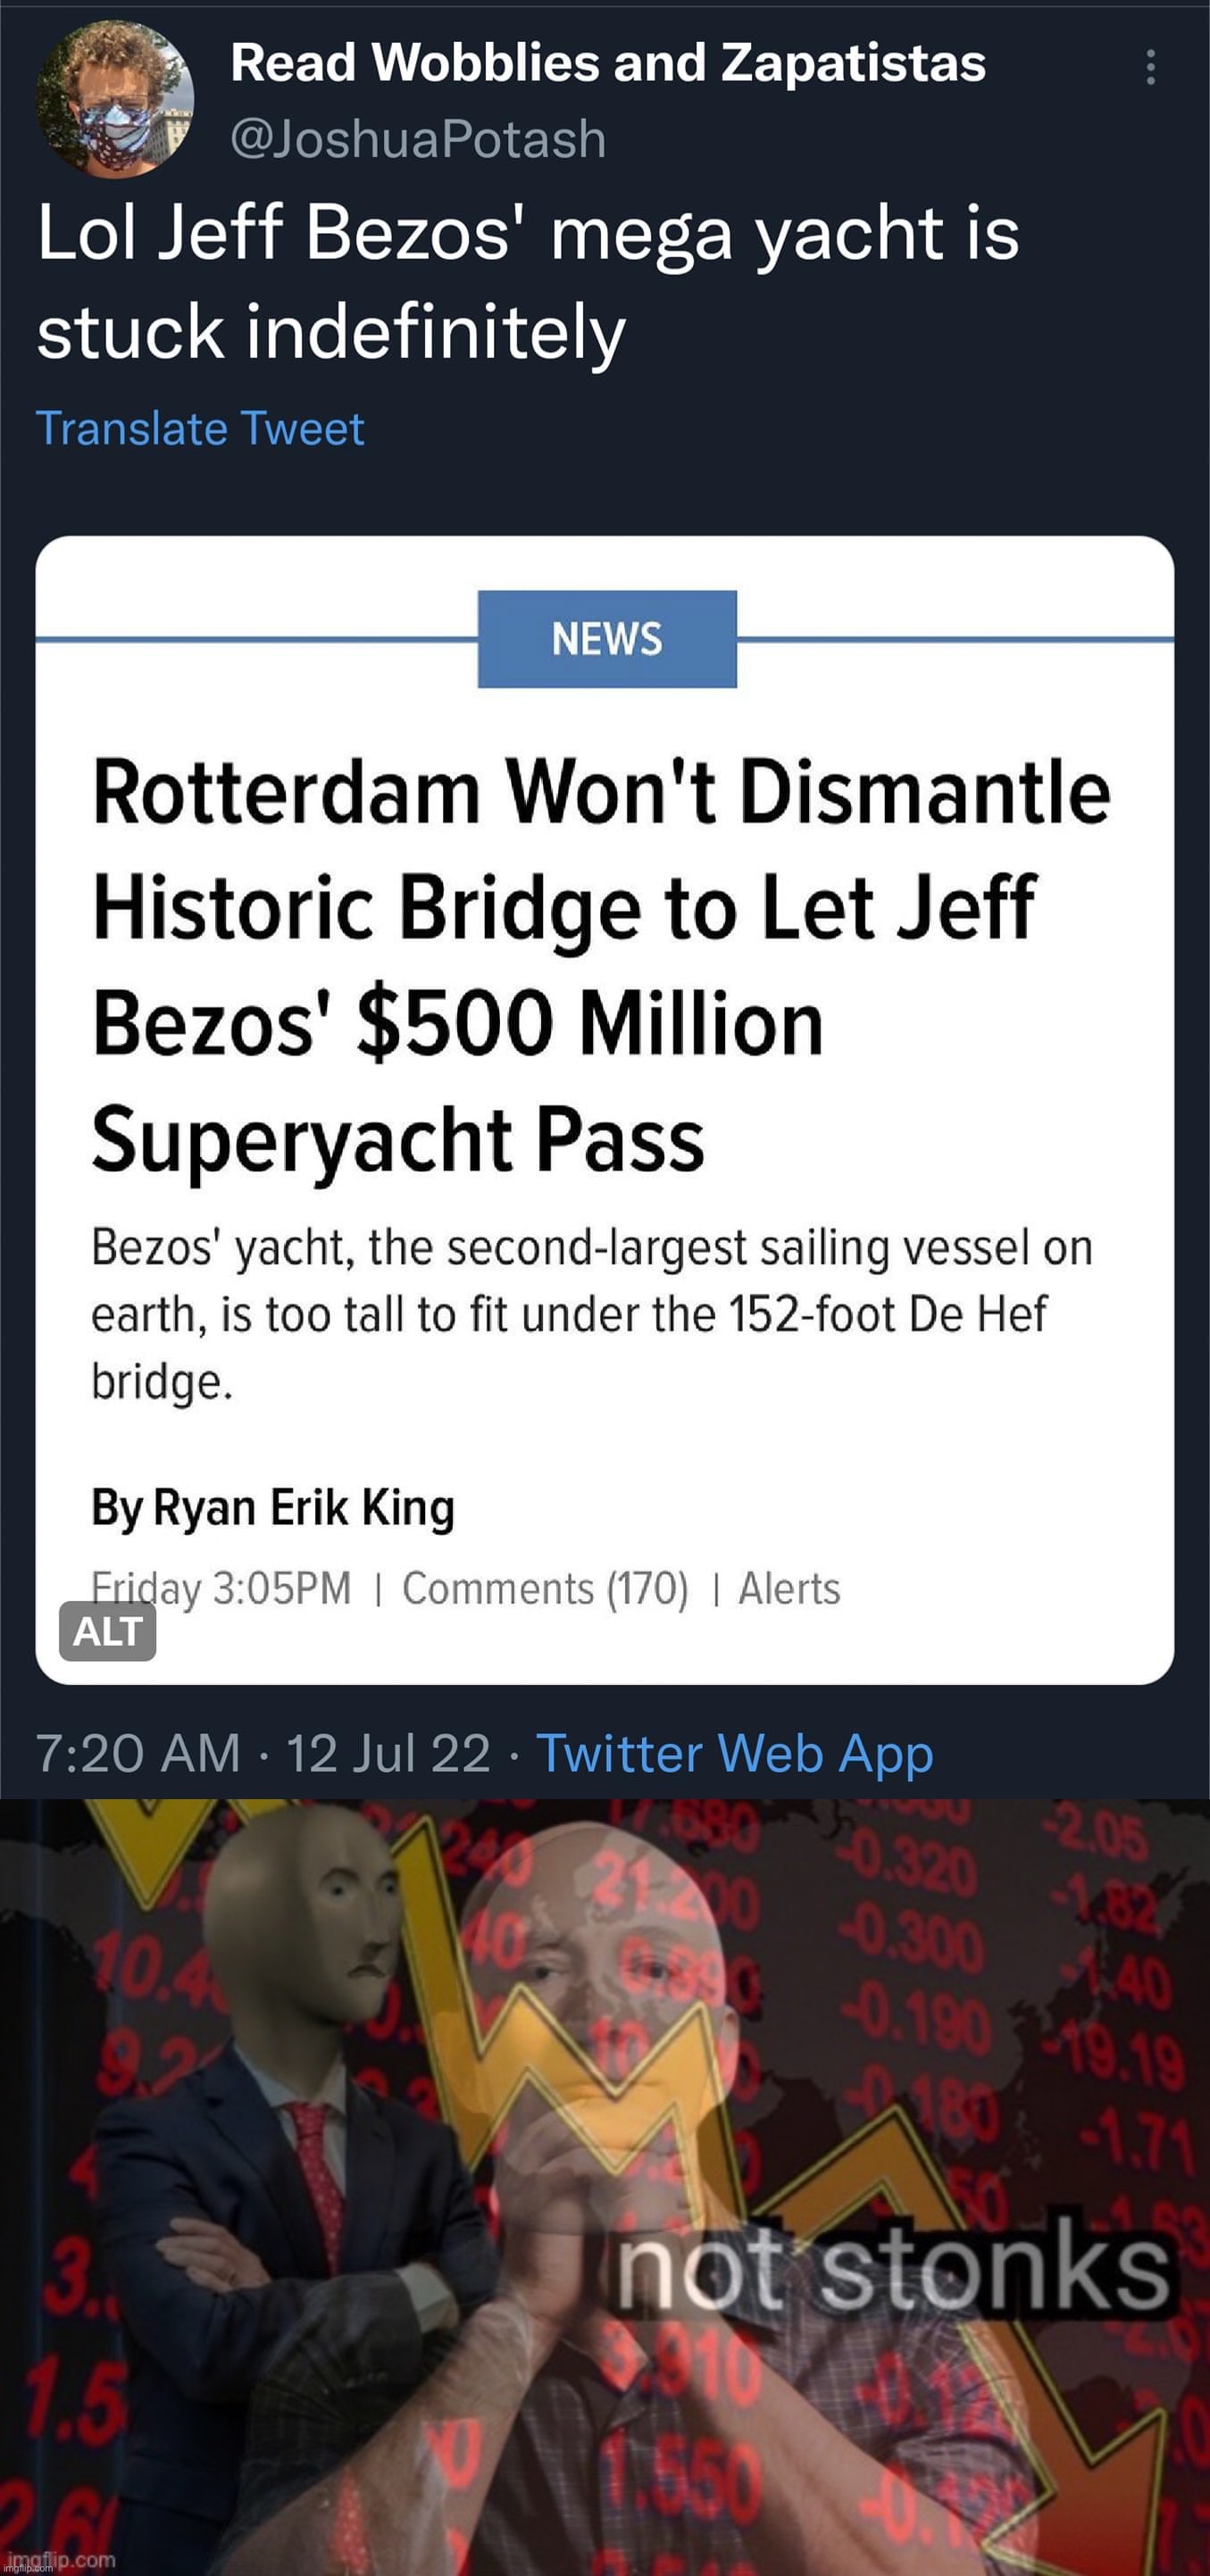 Wholesome news of the day: Mega-Billionaires cockblocked from dismantling historic bridges | image tagged in jeff bezos yacht stuck,jeff bezos not stonks,oof,jeff bezos,bezos,wholesome | made w/ Imgflip meme maker